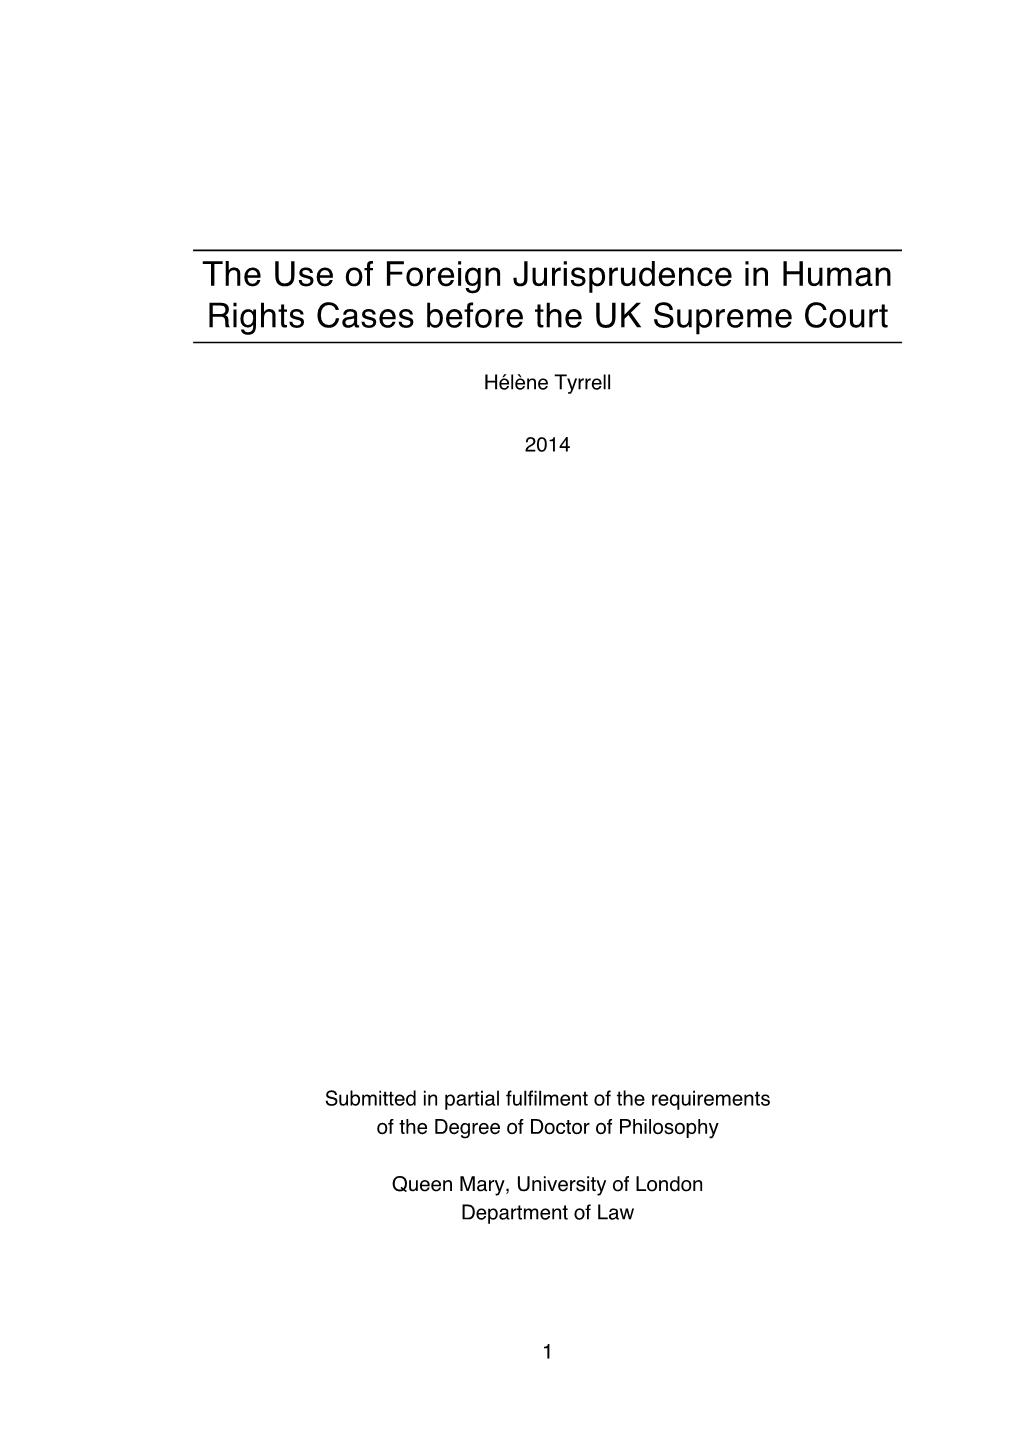 The Use of Foreign Jurisprudence in Human Rights Cases Before the UK Supreme Court